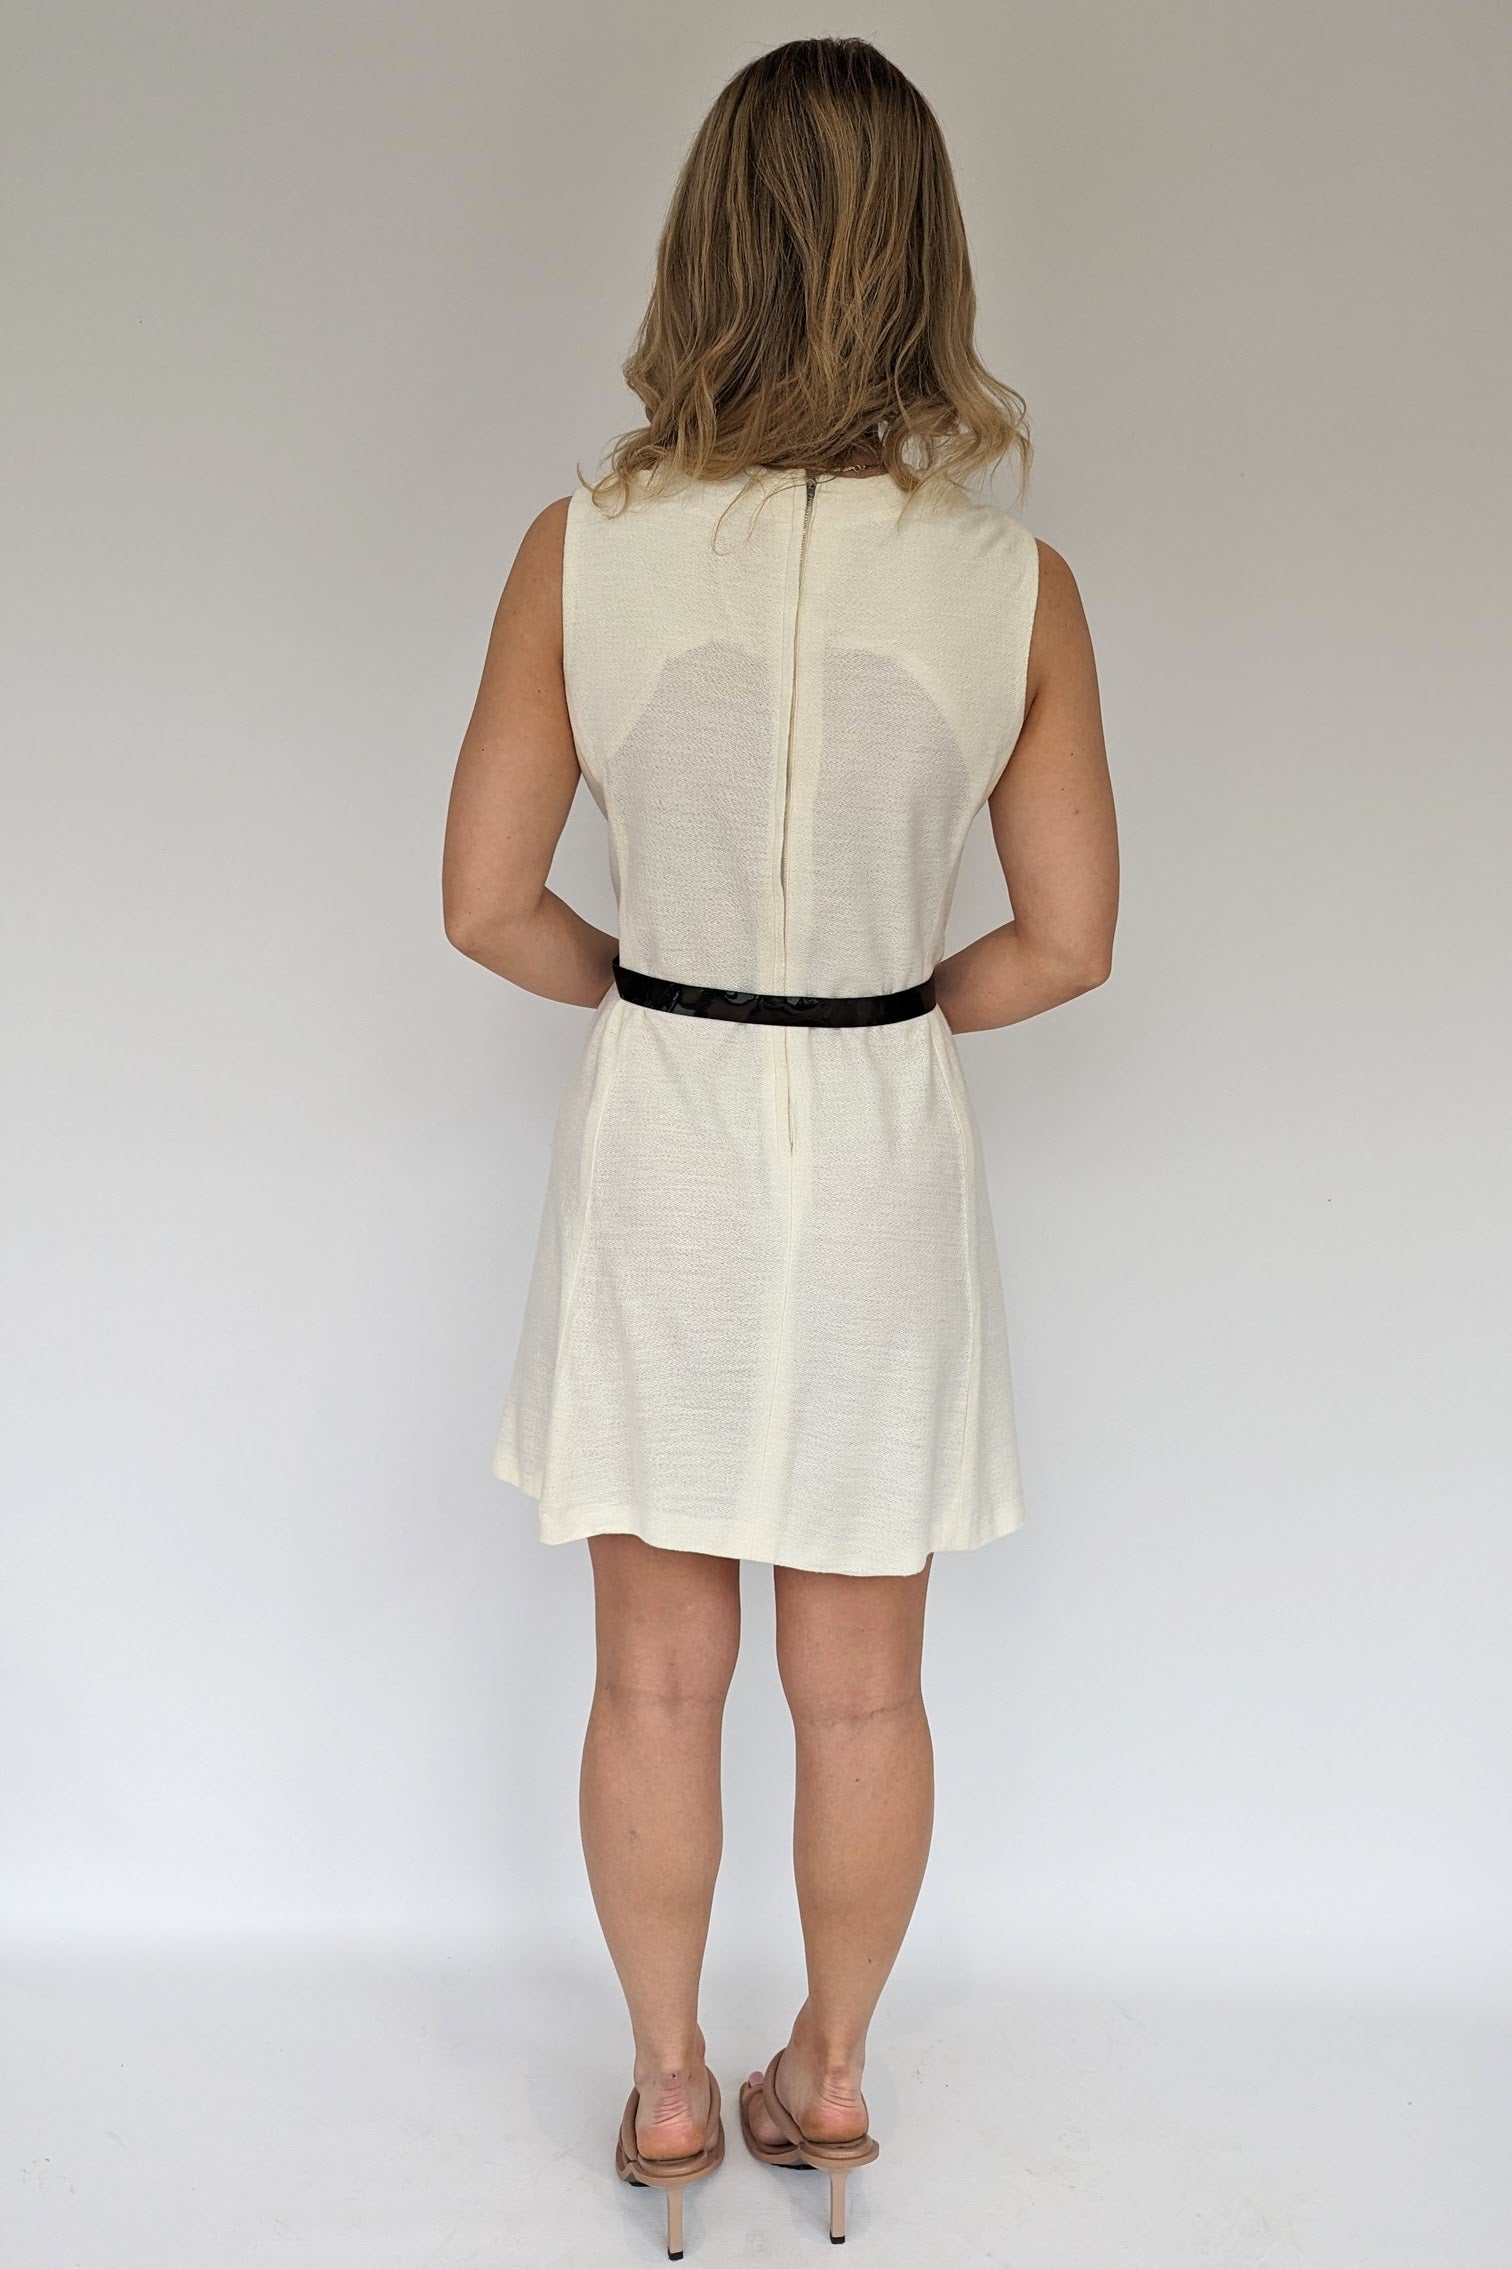 back view of side view of mod 60s cream jersey dress with decorative black buttons and patent belt